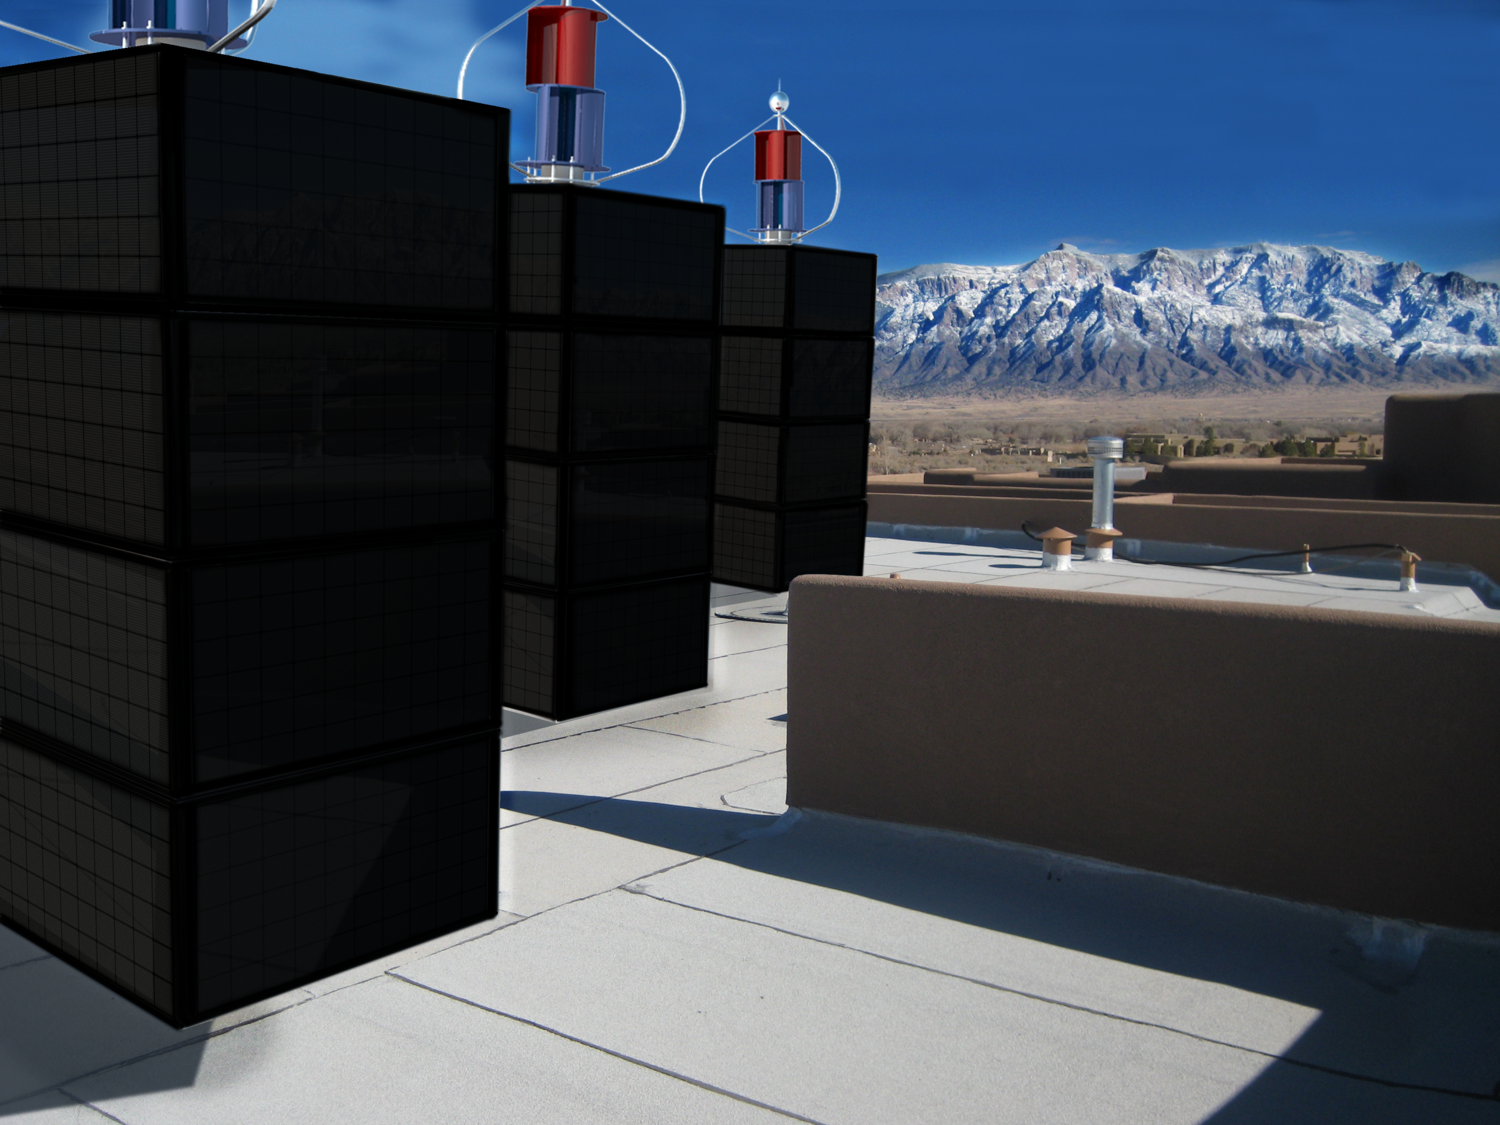 myPowerTower.org by cleantech-shop.org on the roof of a building with silver solarpannels